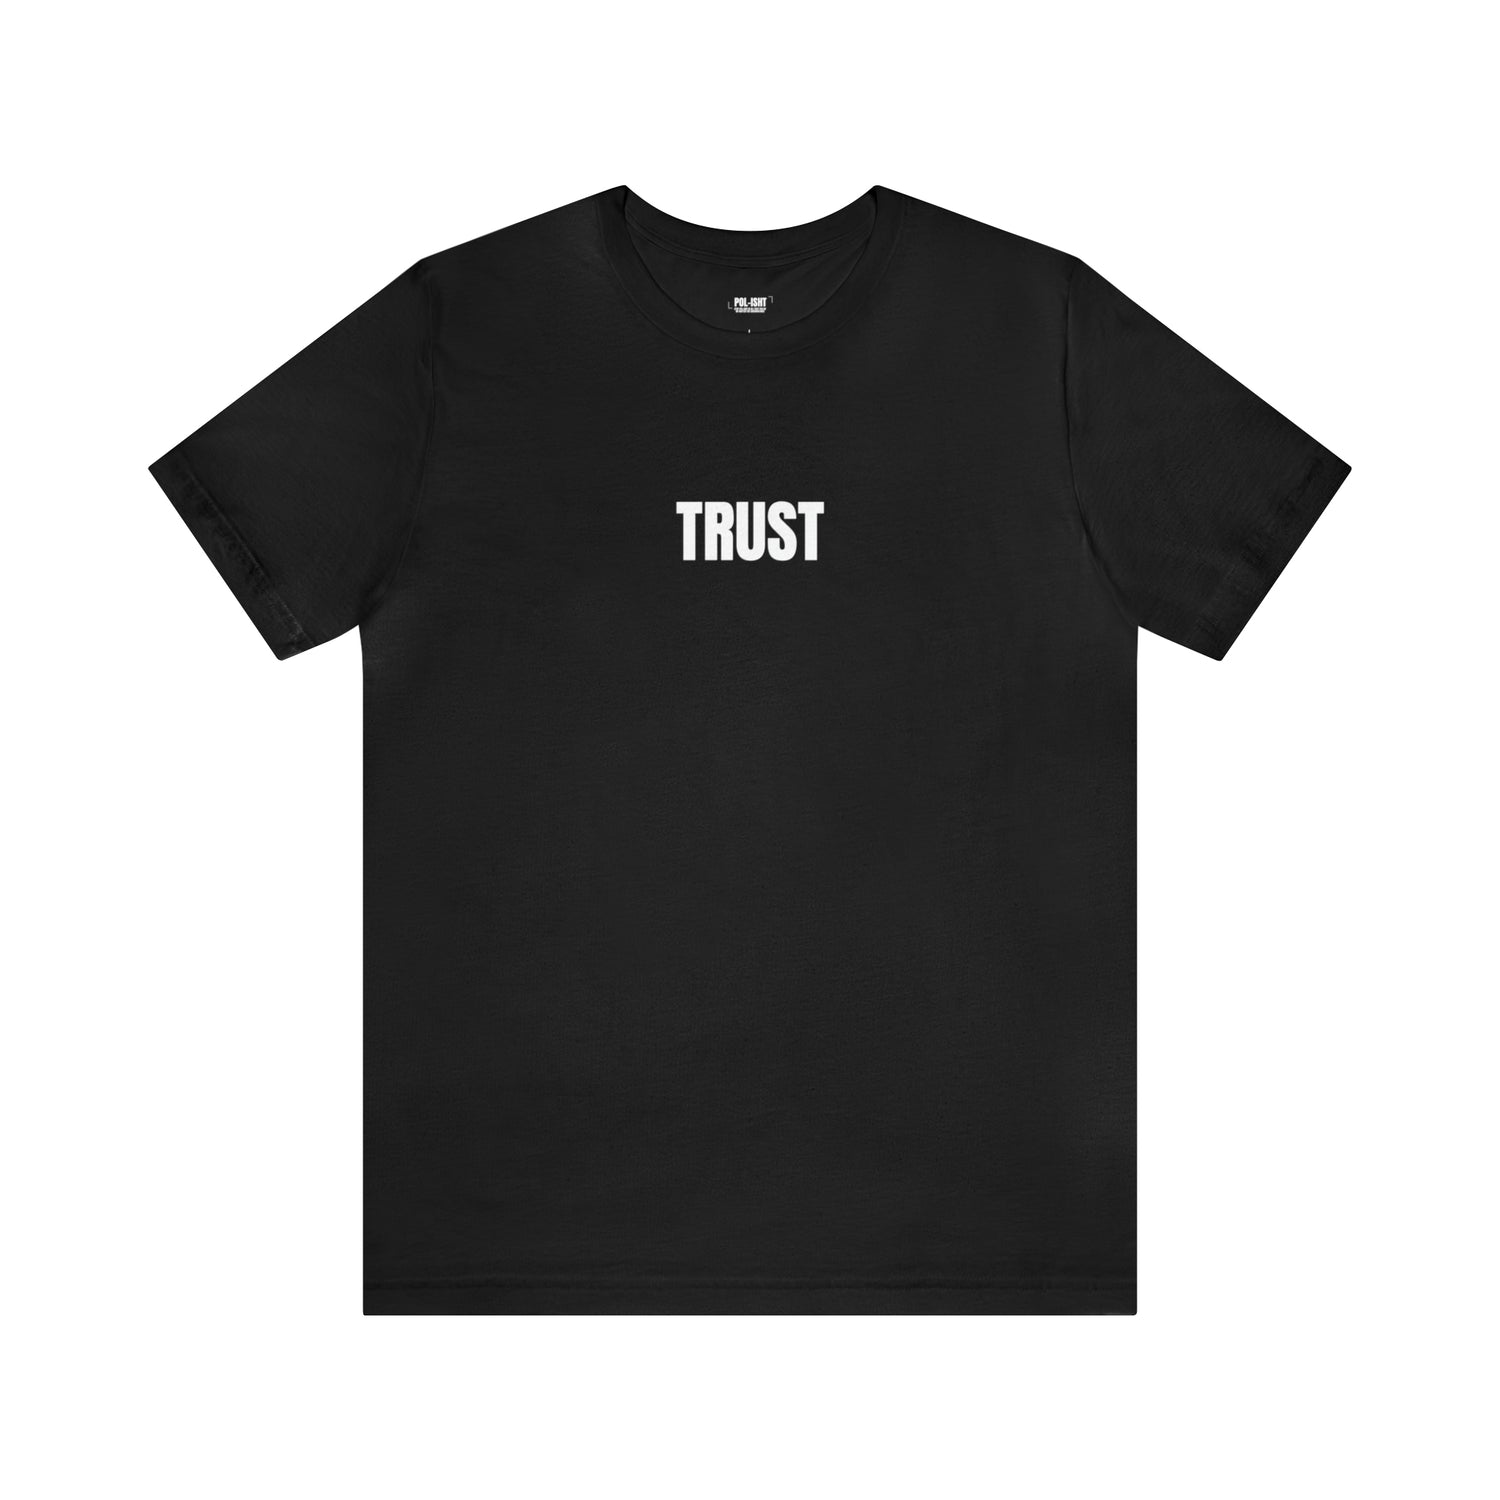 Trust Your Vision Short Sleeve Tee